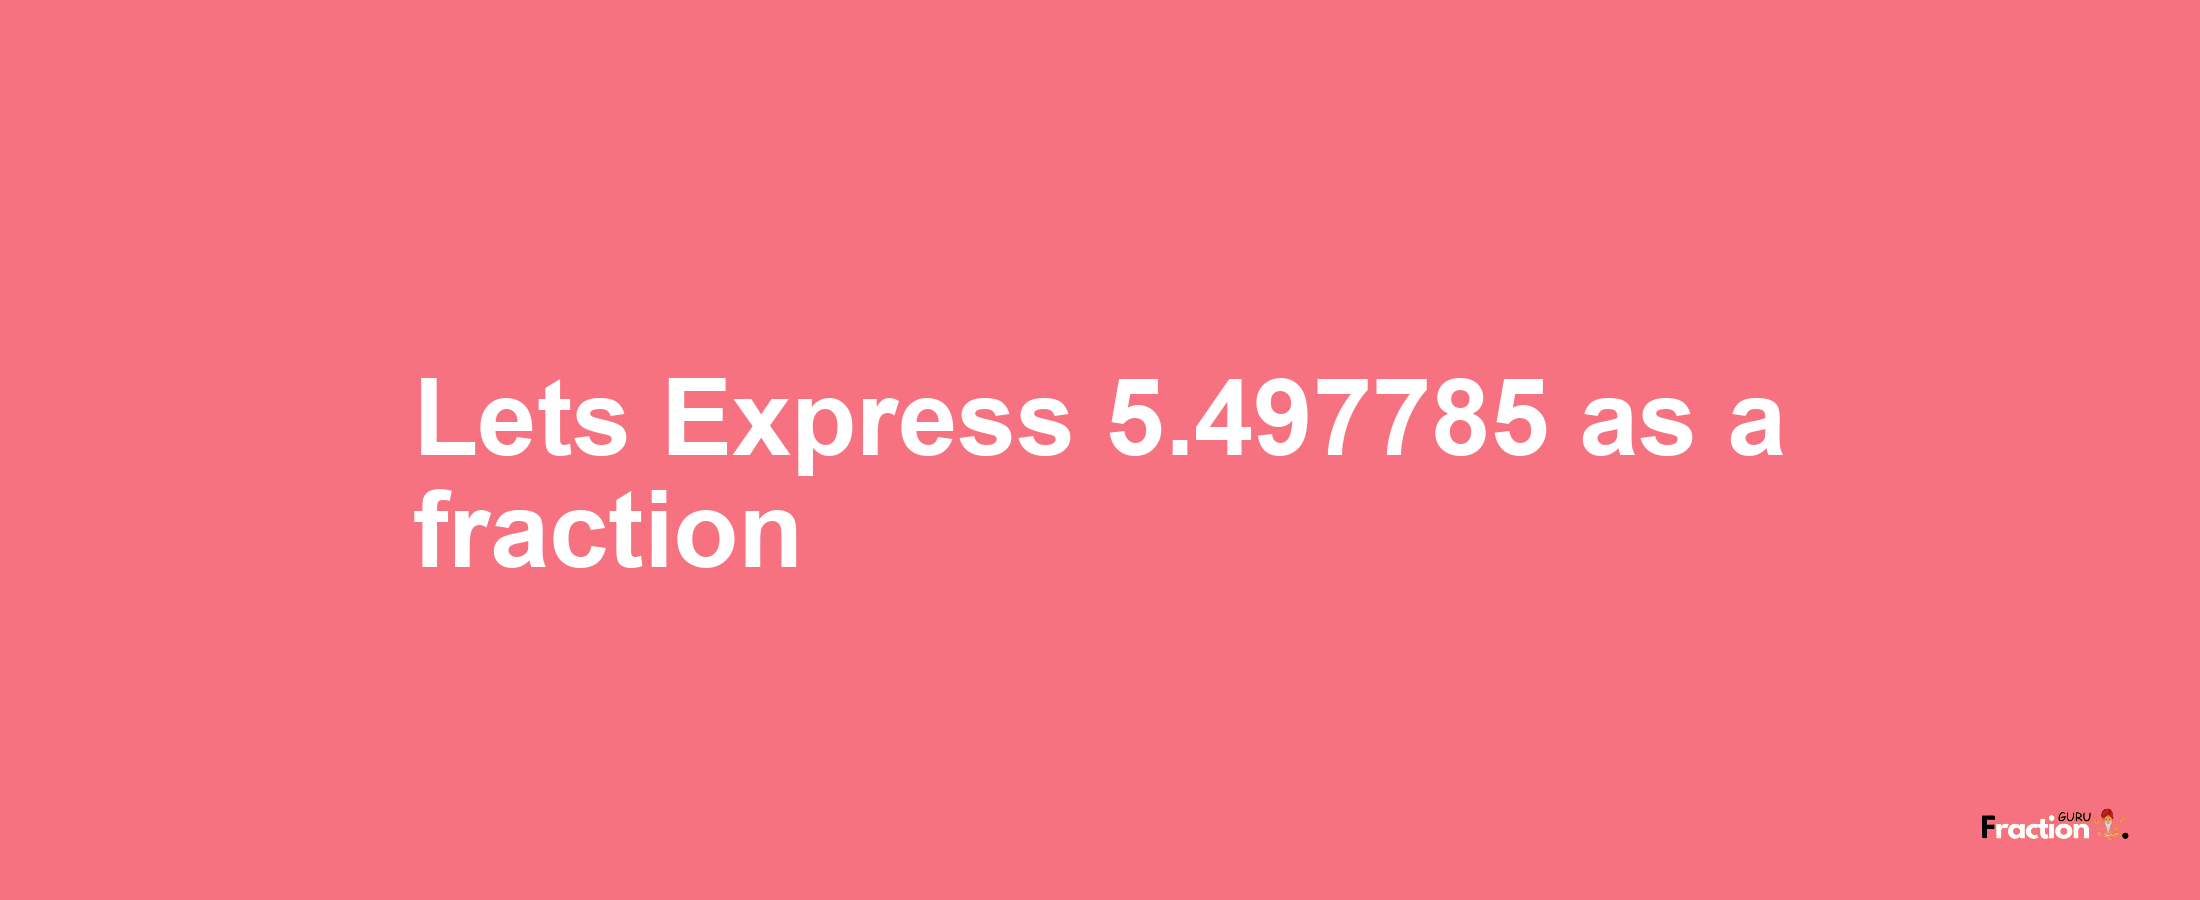 Lets Express 5.497785 as afraction